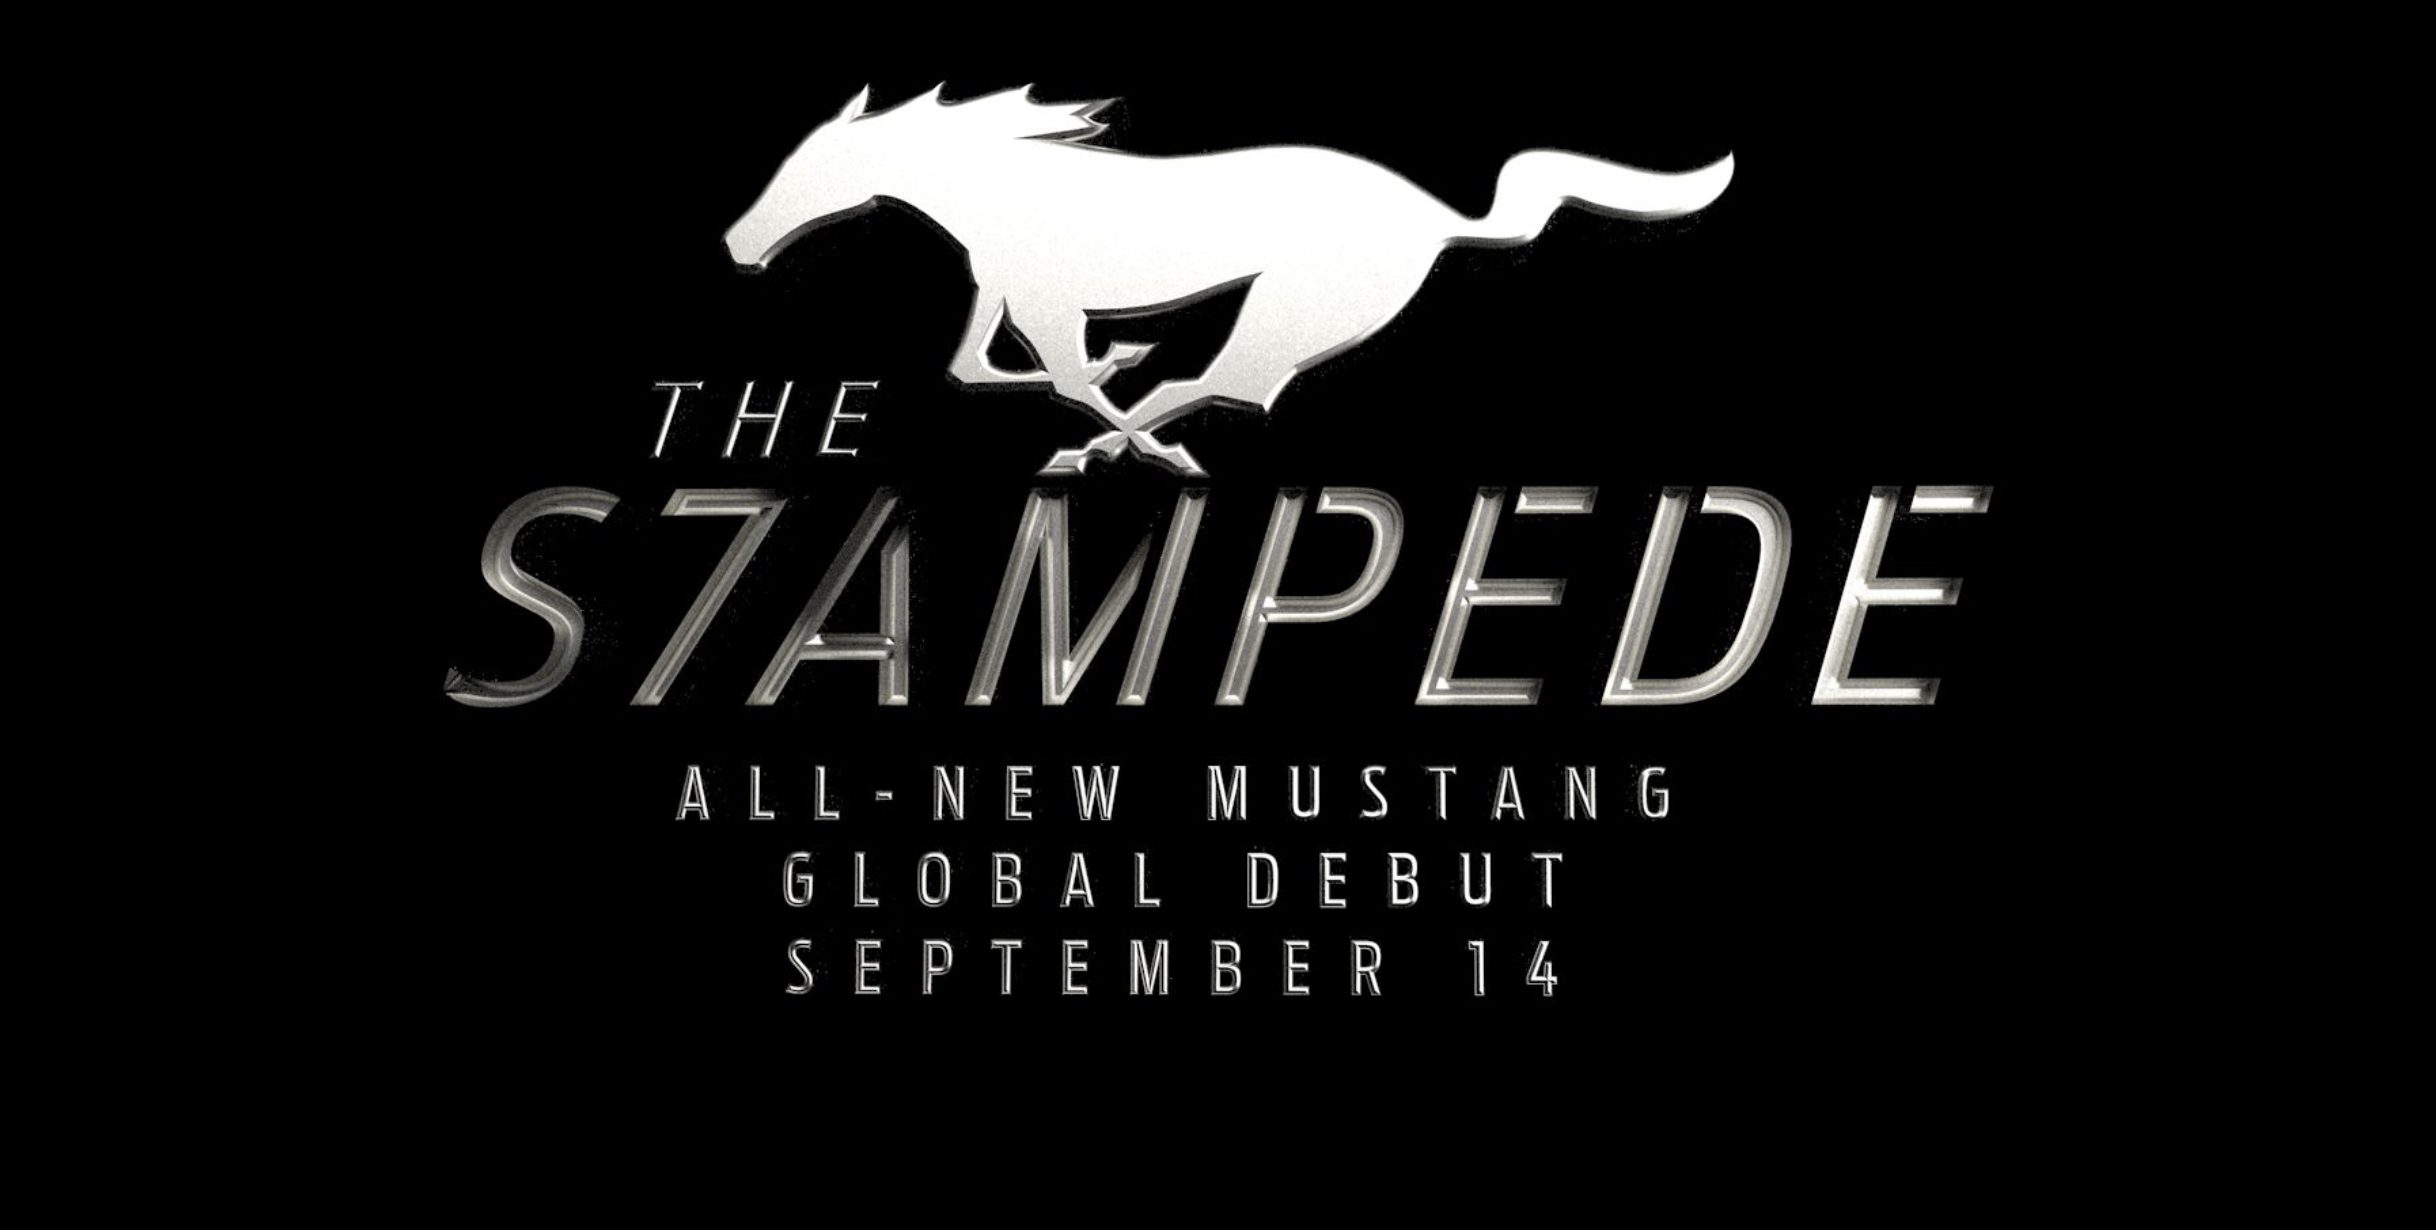 Ford's Mustang Stampede launch